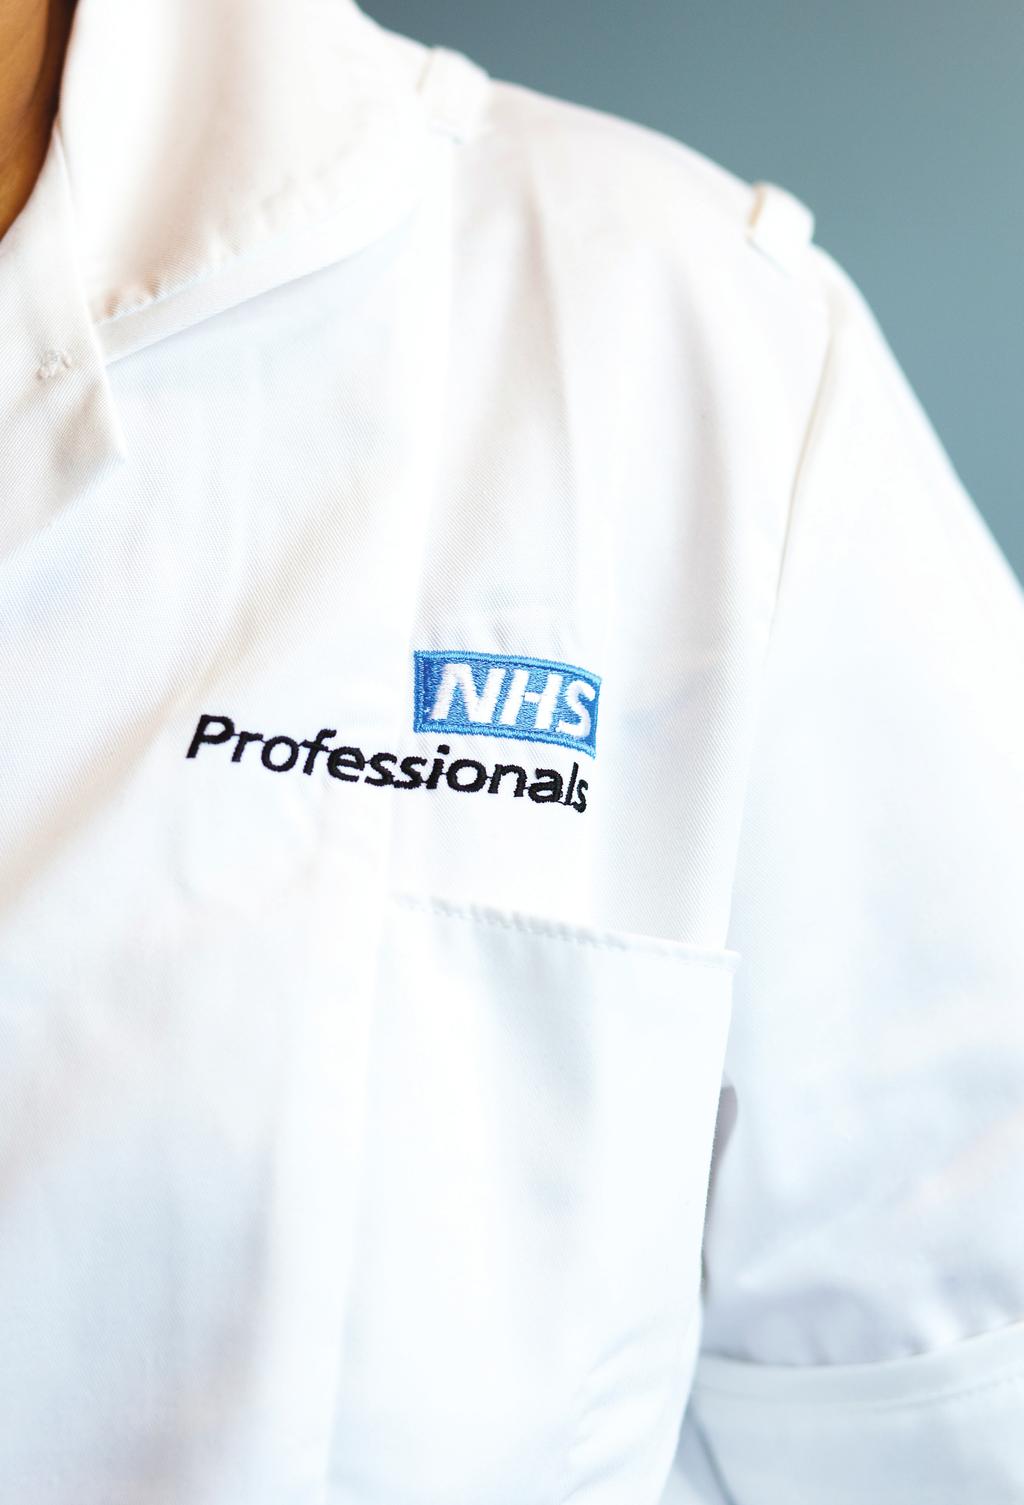 NHS Professionals Limited Interim Results